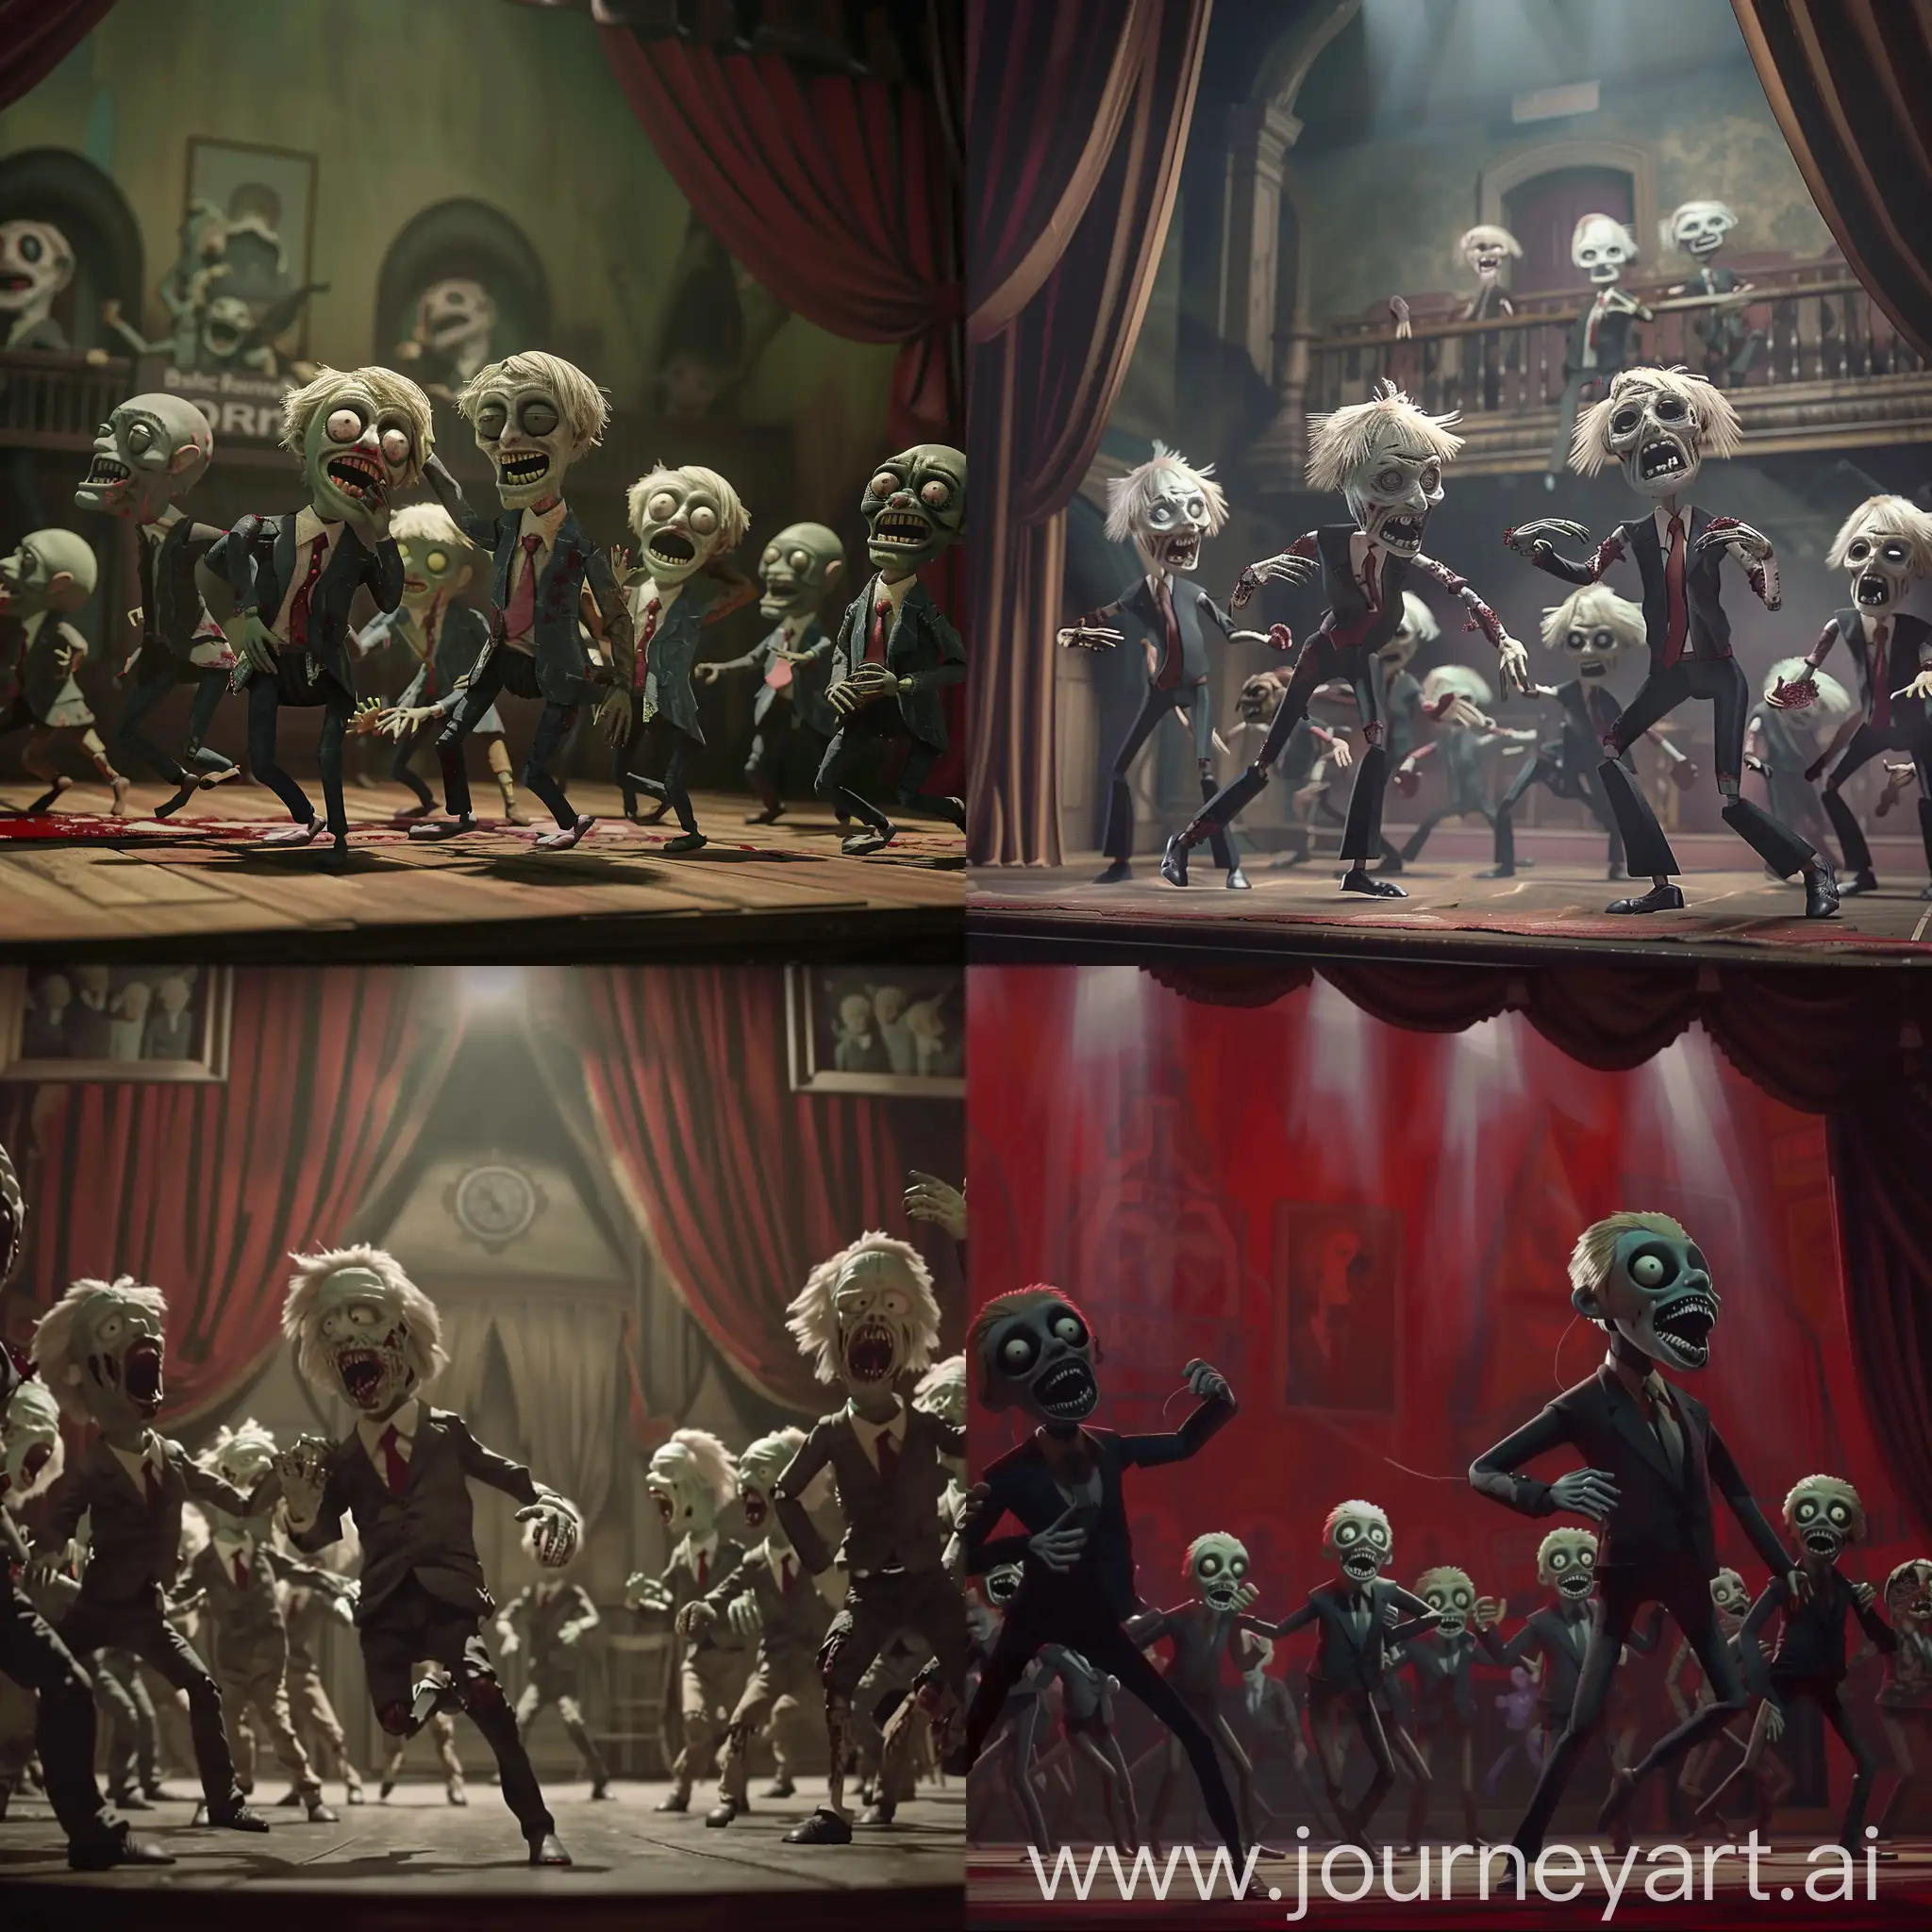 animation shows a creepy little theatre stage full of puppets dancing who represent Boris Johnson. It's a kind of zombie dance,